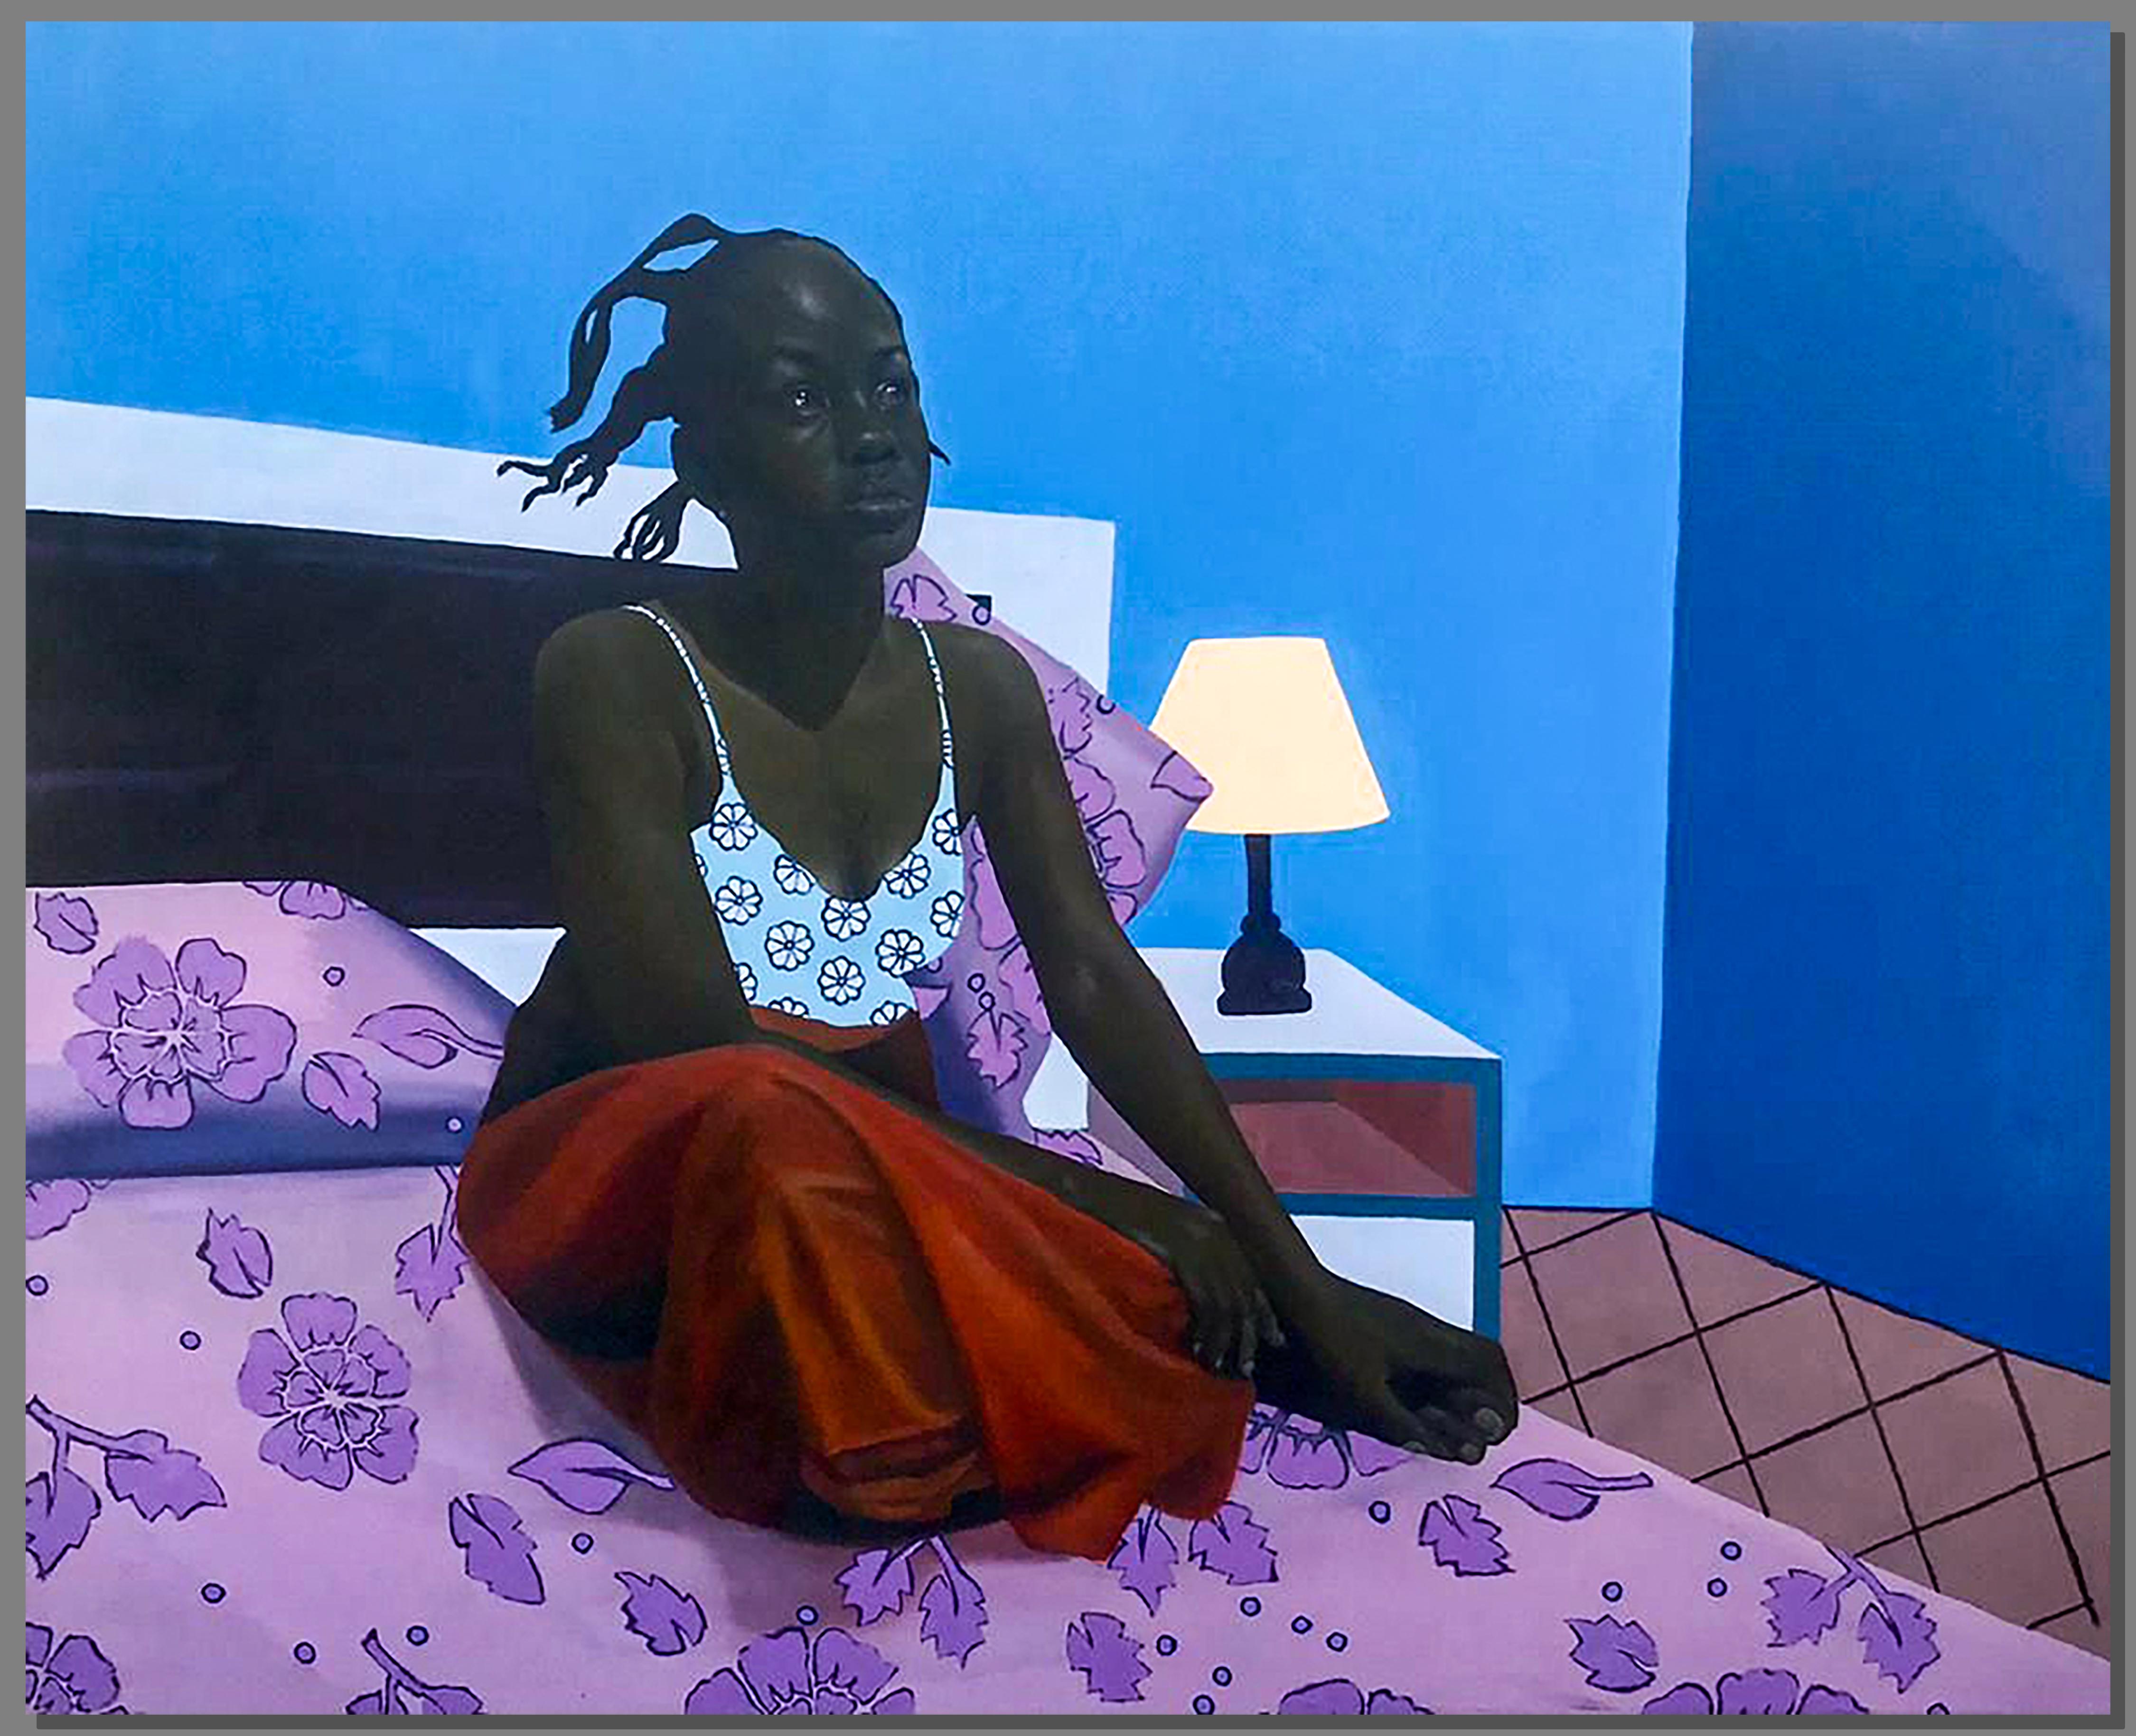 Alot on my mind(Thoughts)iii - Painting by Adeogun Babatunde Joseph